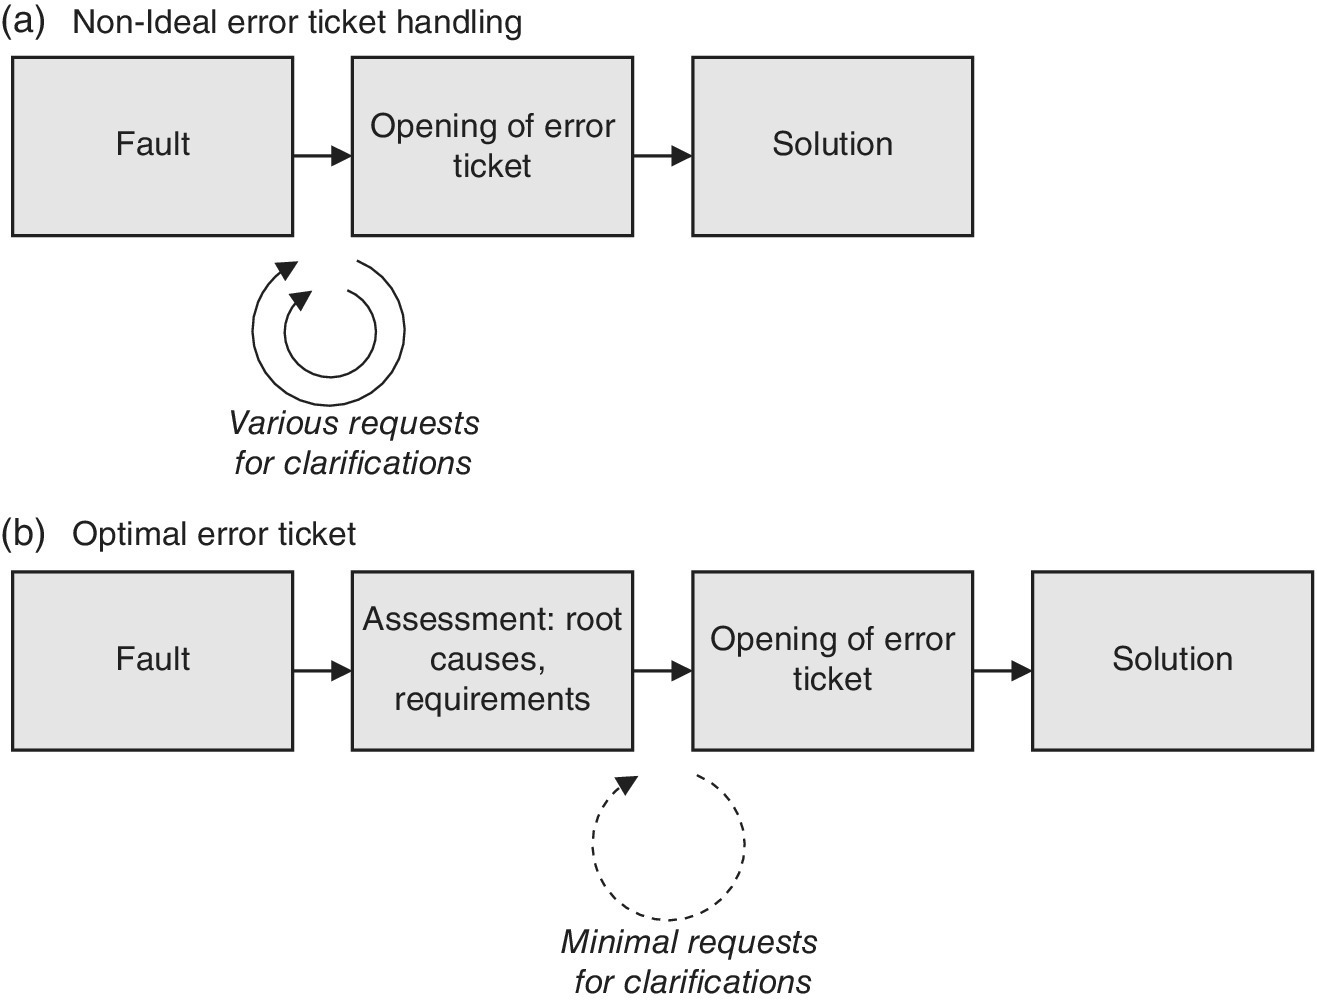 Two diagrams illustrating the process for the error ticket opening applicable to LTE/LTE-A UE and network elements, displaying non-ideal error ticket handling (top) and optimal error ticket (bottom).